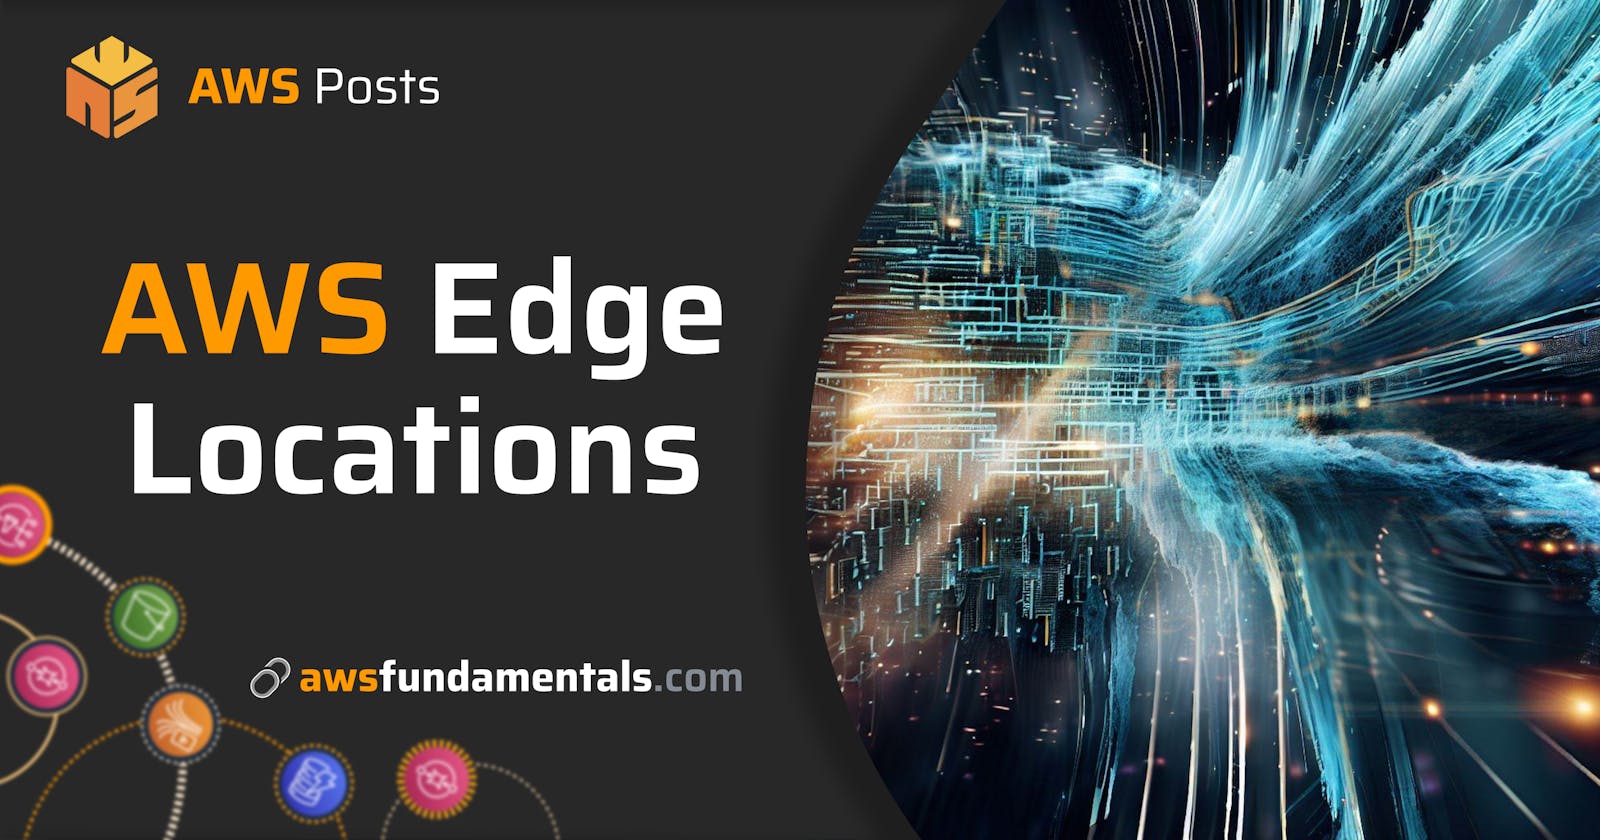 AWS Edge Locations: What They Are and Where to Find Them